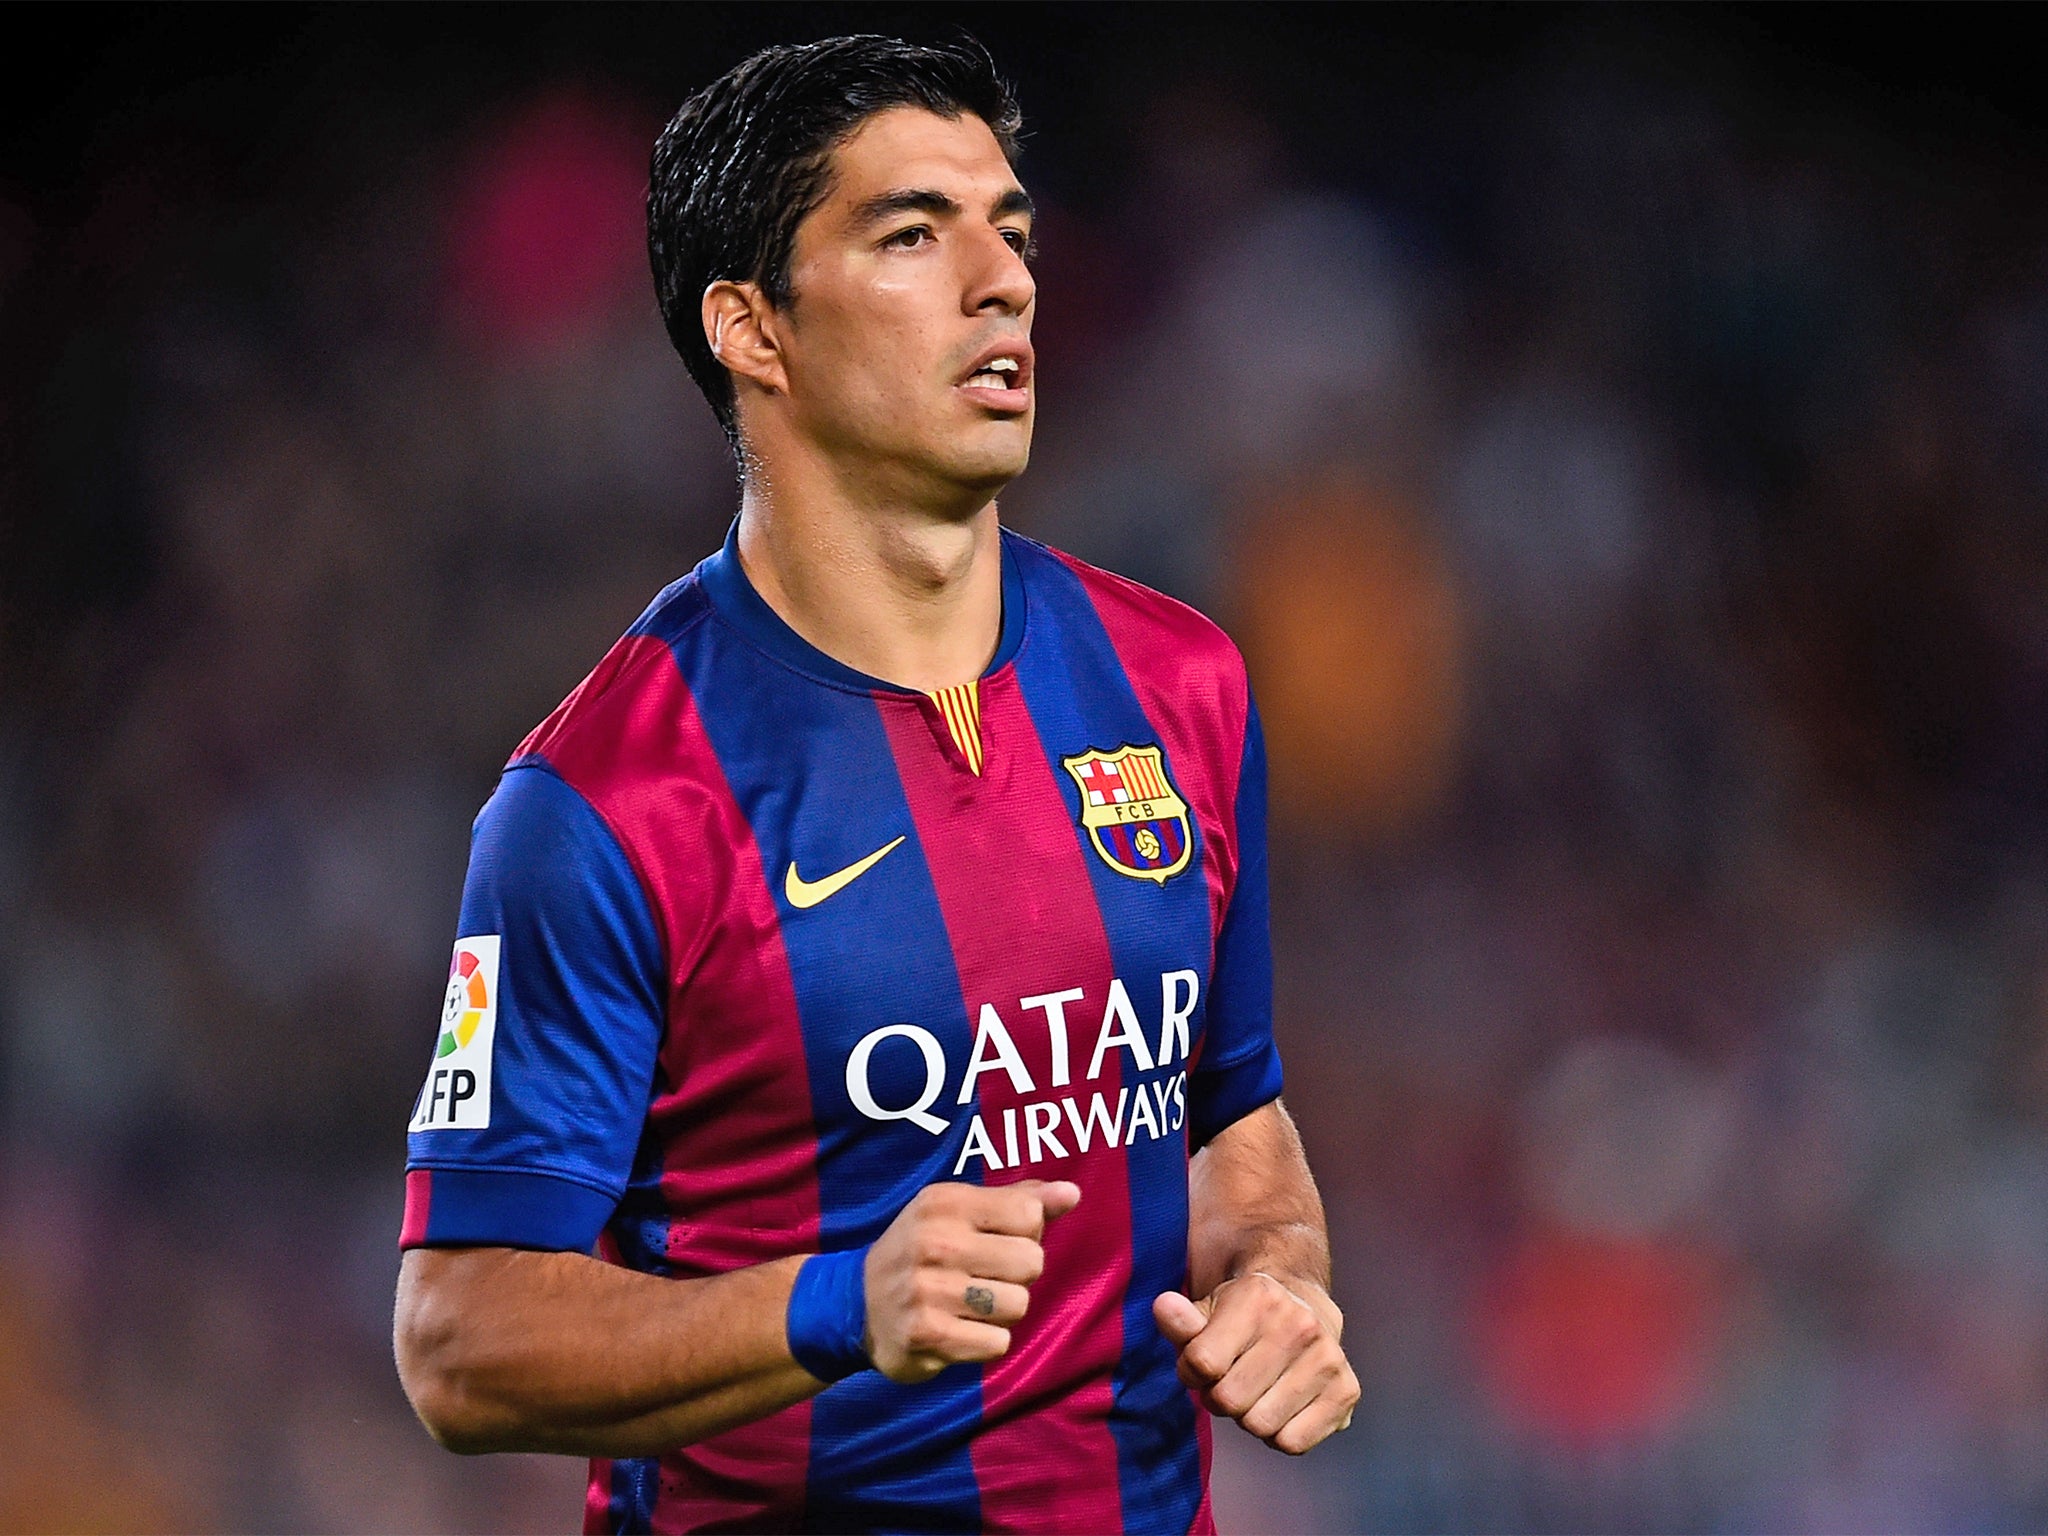 Barcelona have pinned their hopes on Luis Suarez giving them an edge in stemming the Real Madrid tide